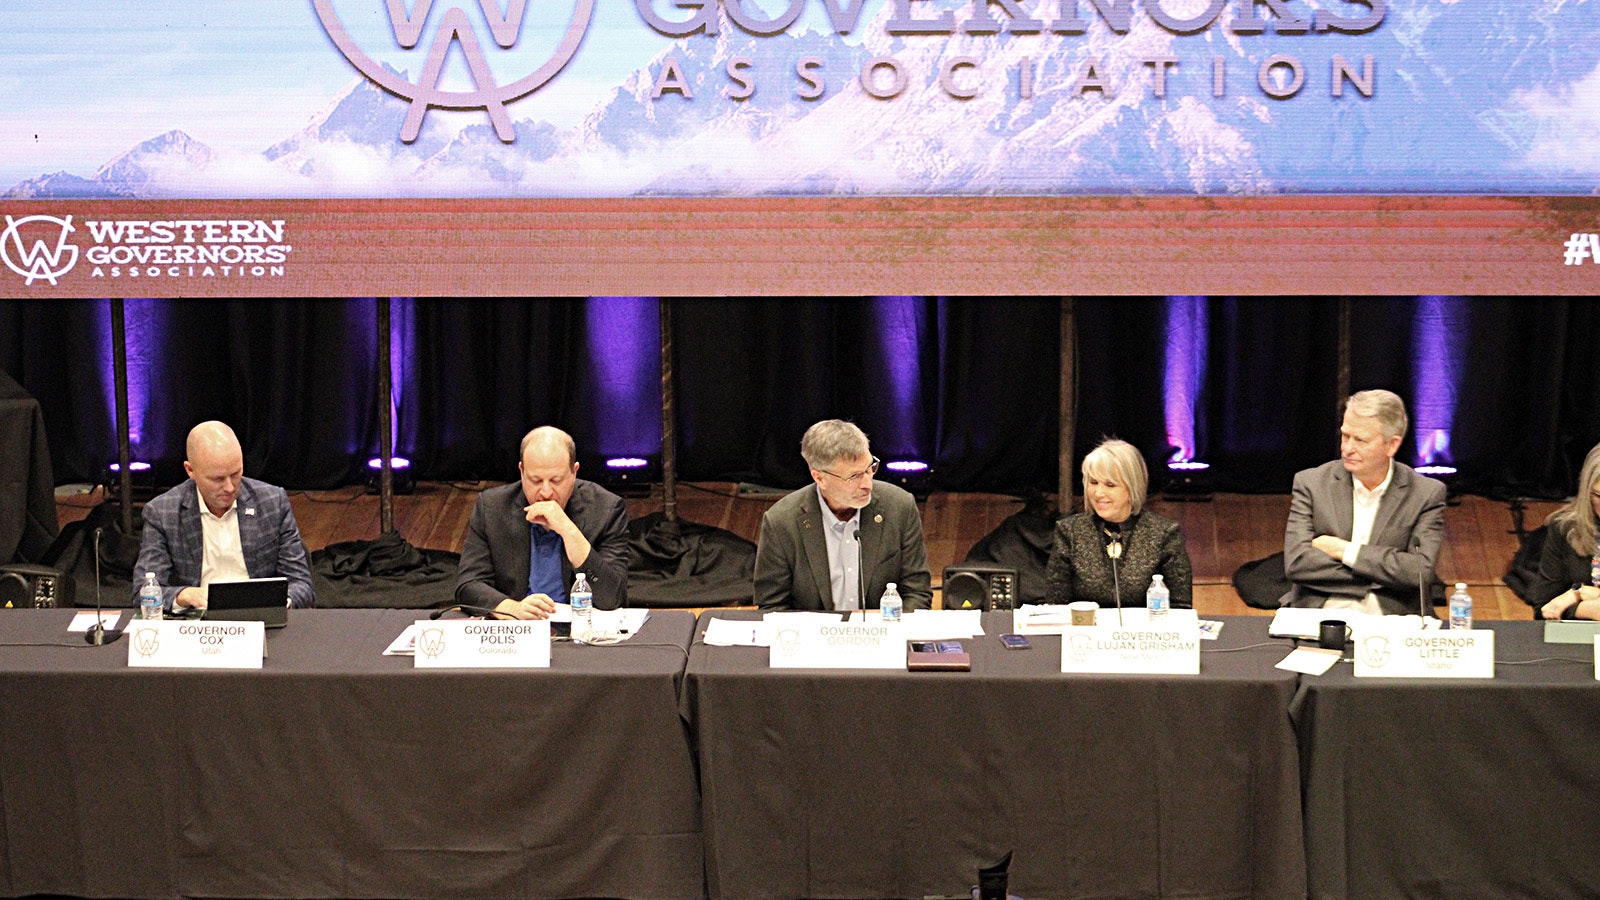 Wyoming Gov. Mark Gordon, center, with other Western U.S. governors on the first day of the Wester Governors' Association meeting in Jackson, Wyoming, on Monday.